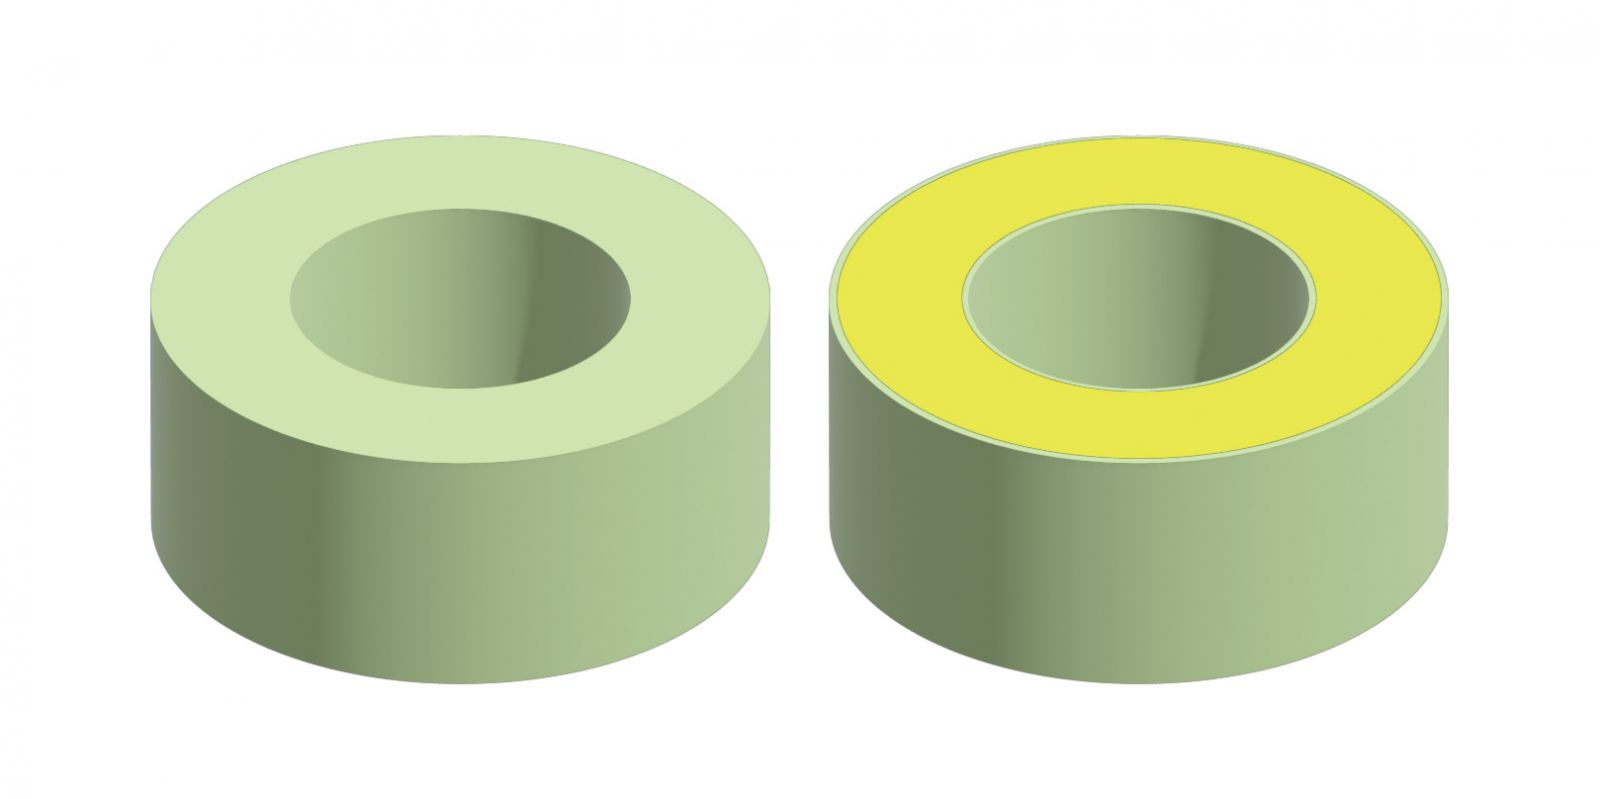 40 material-GOTREND Article-What does the color of the inductor ring mean? High conductivity ring